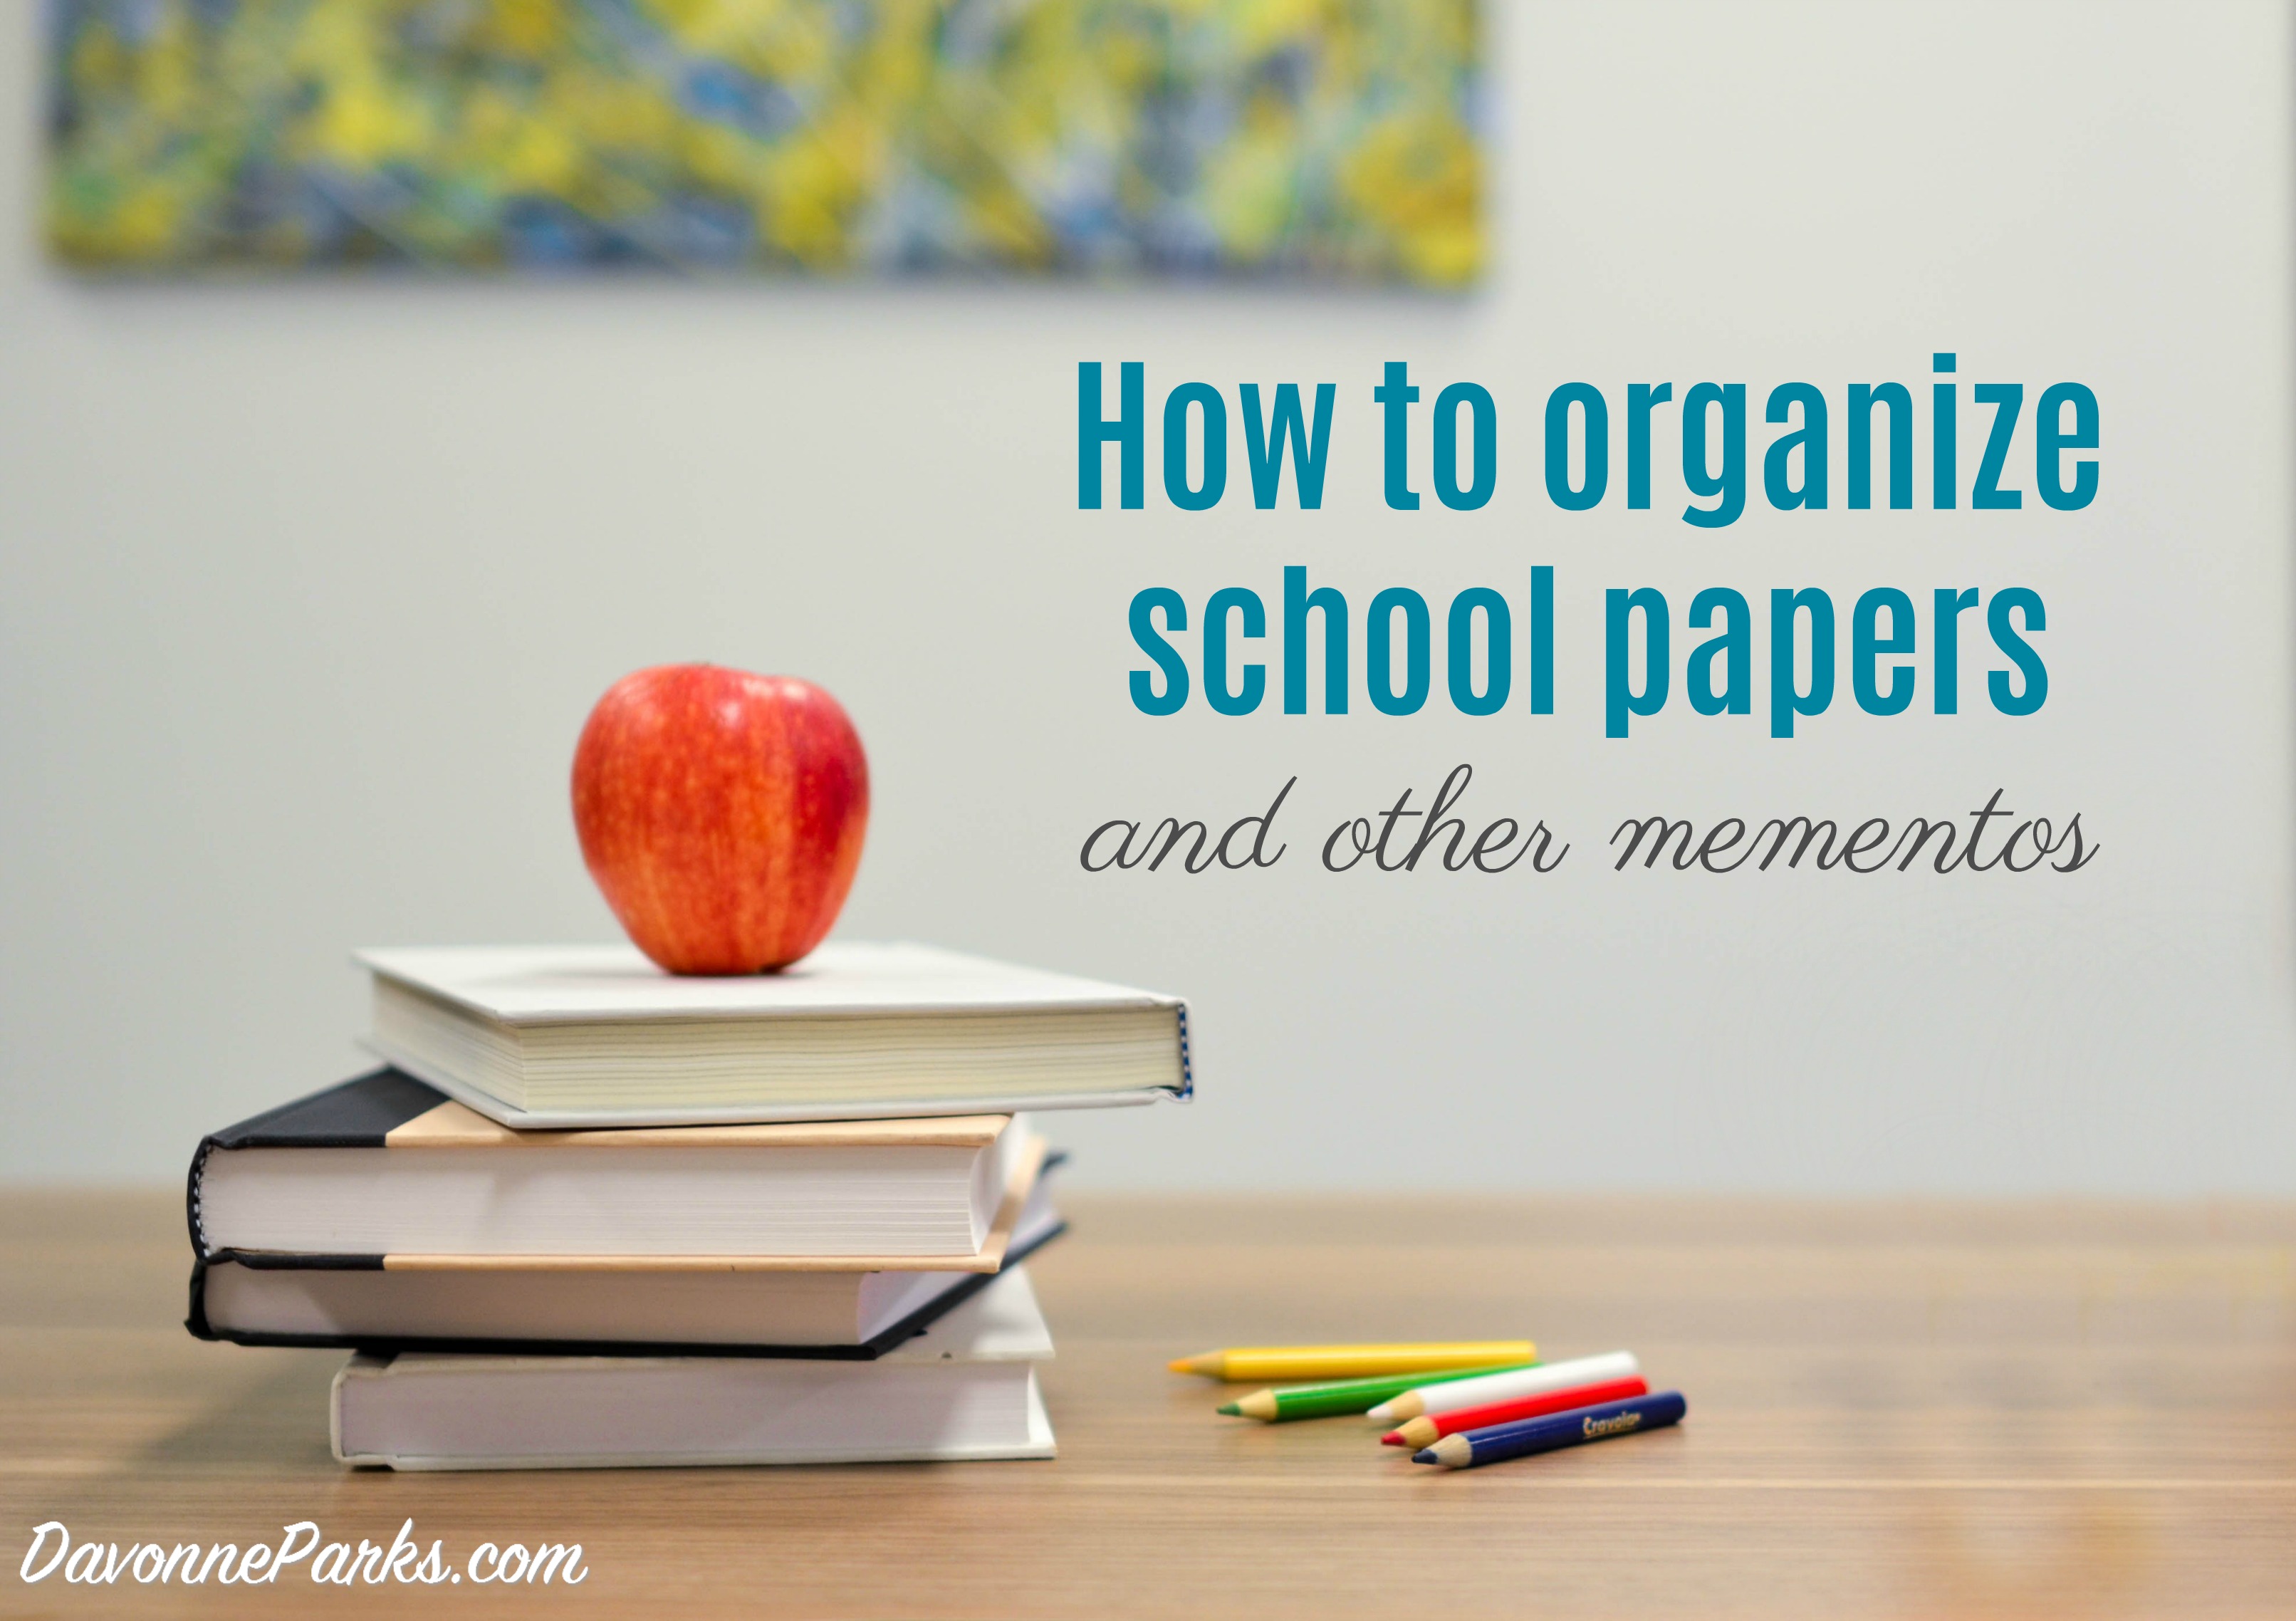 How to Organize School Papers and Other Mementos